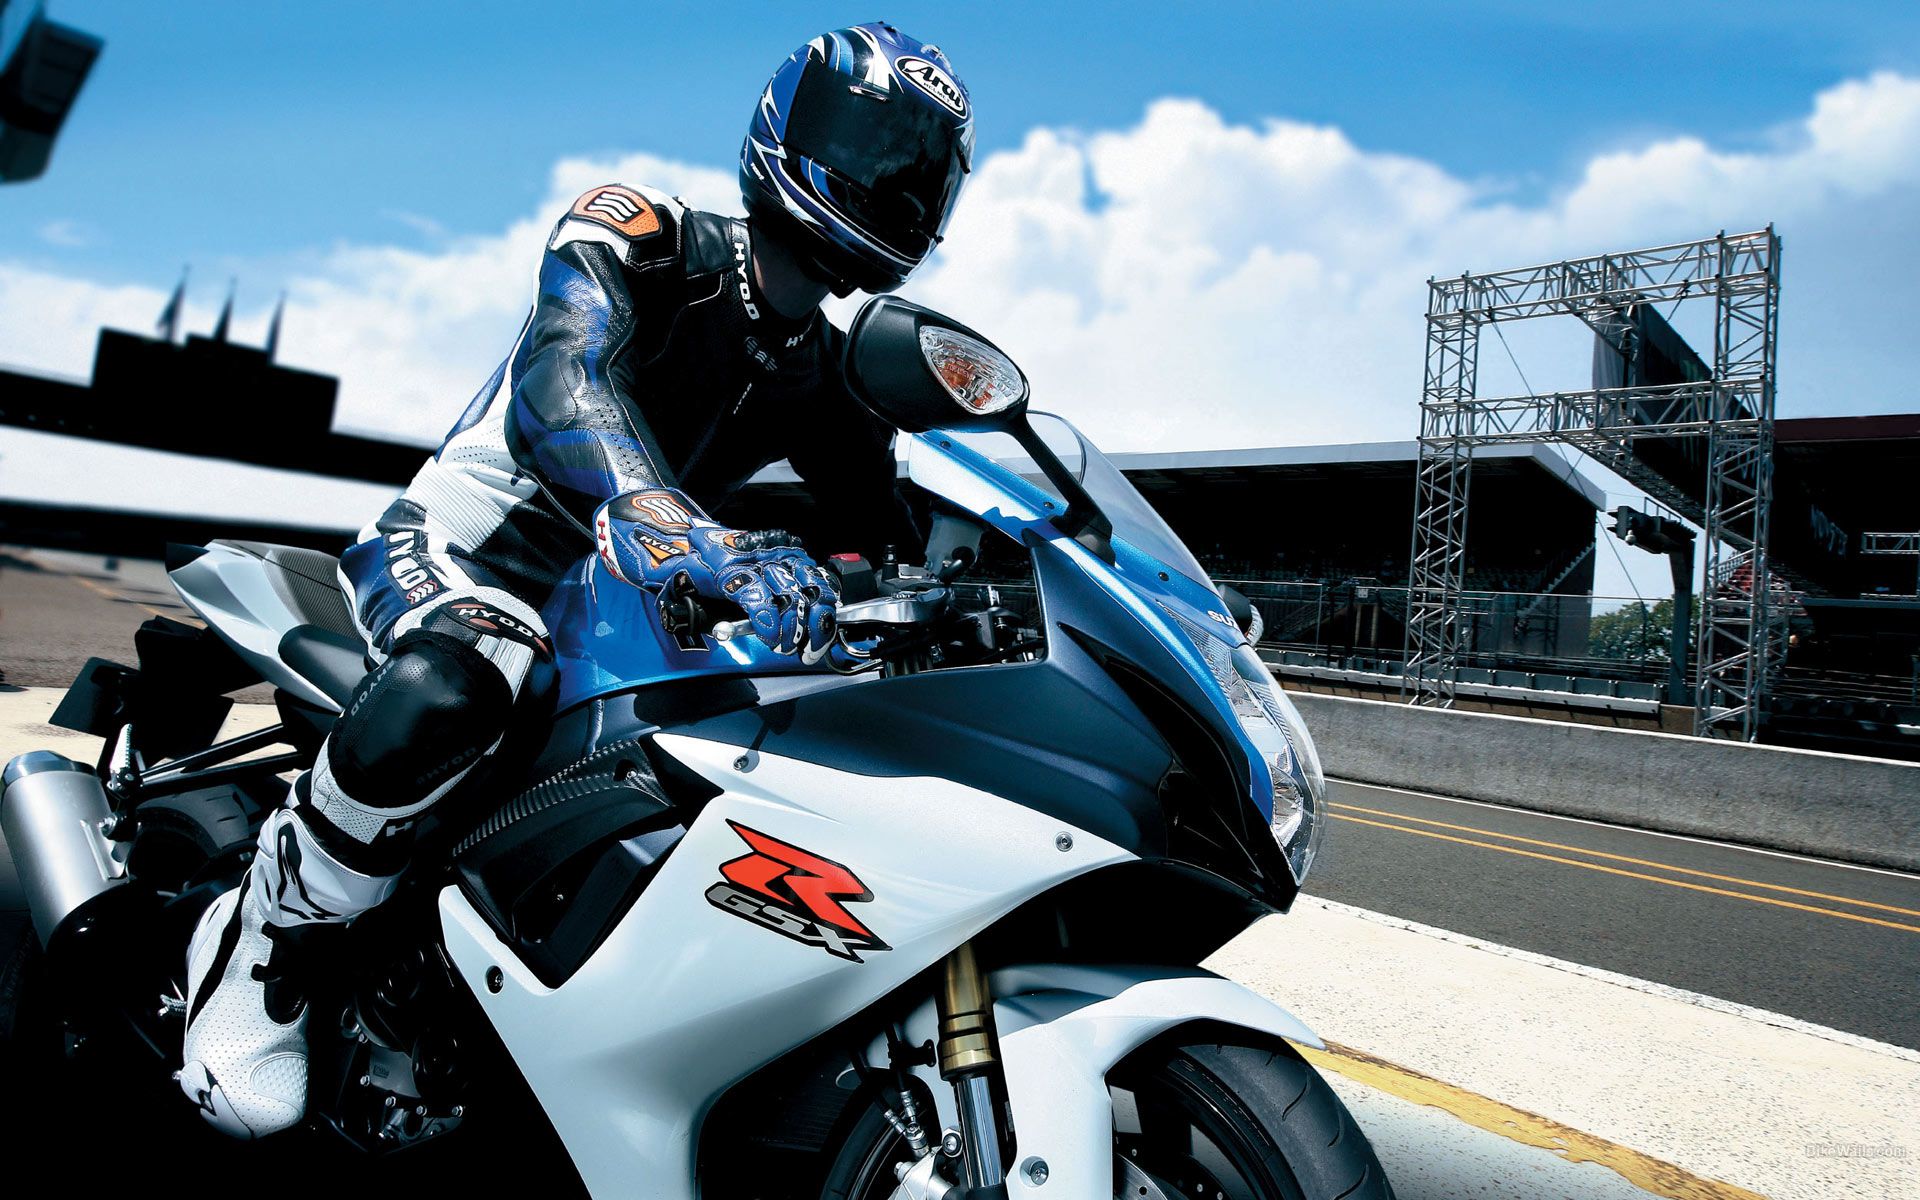 Ranking of the best motorcycle jackets of 2020